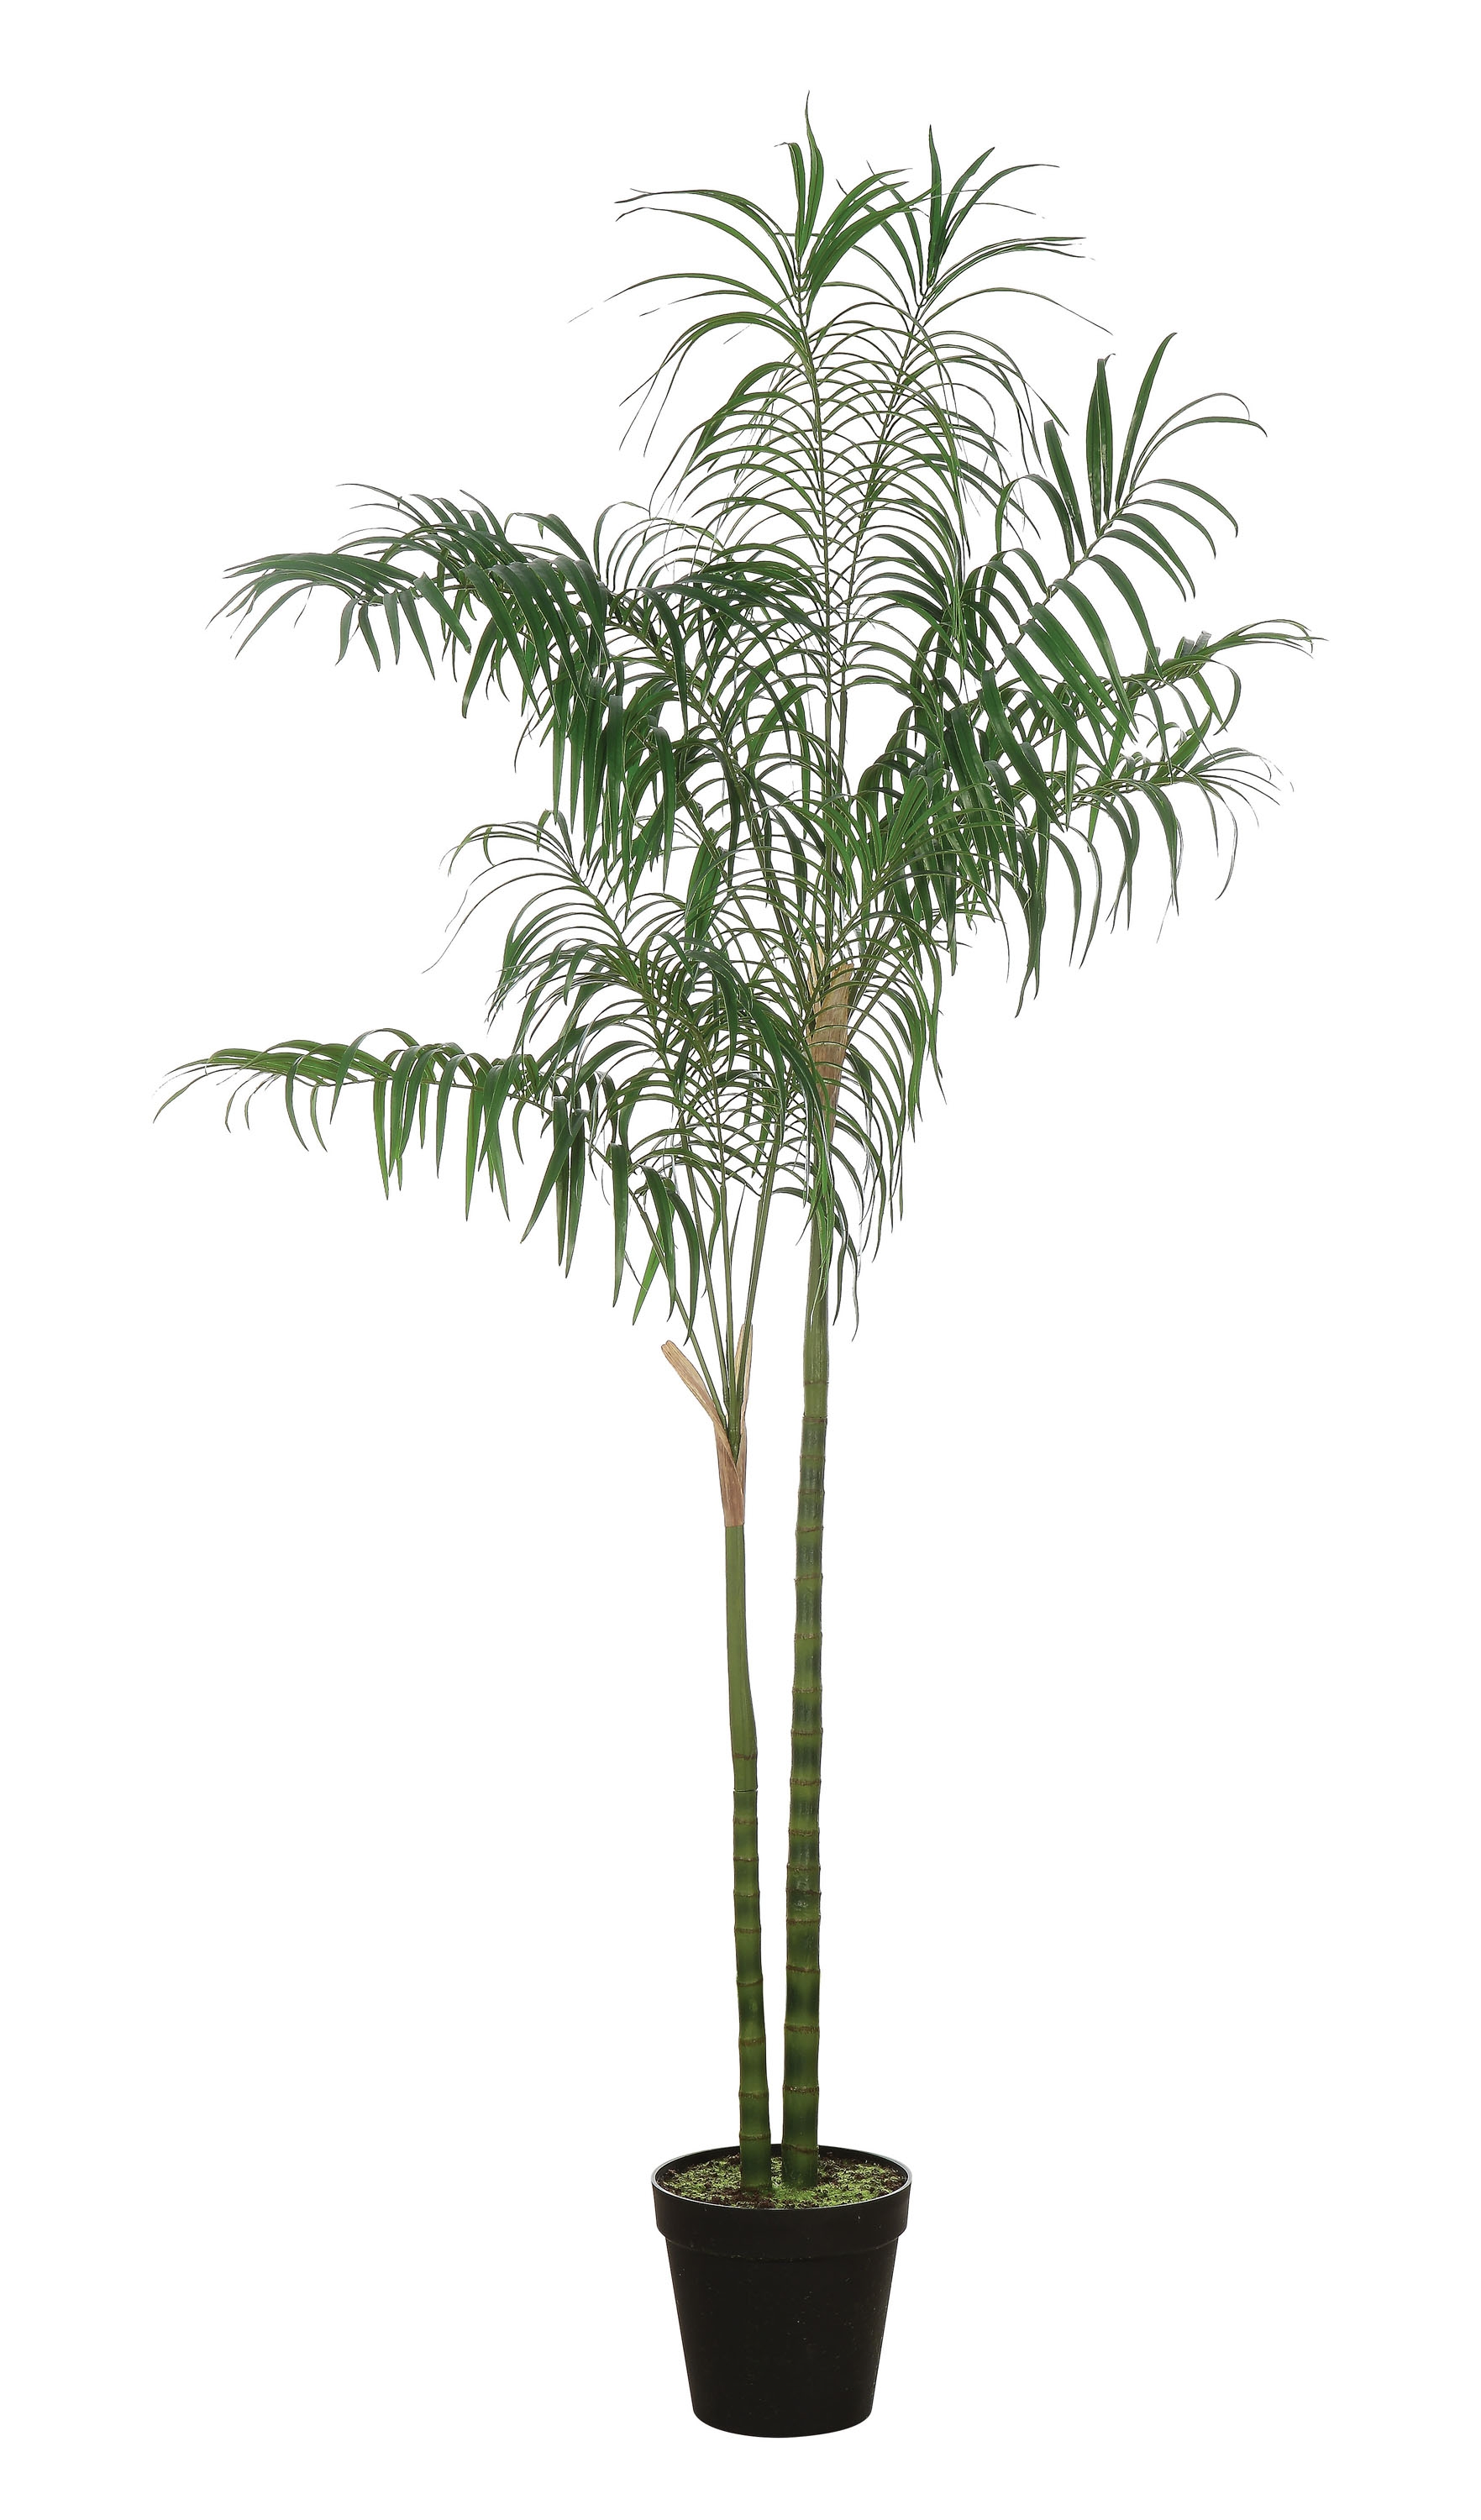 Faux Palm Tree in Pot - Image 0